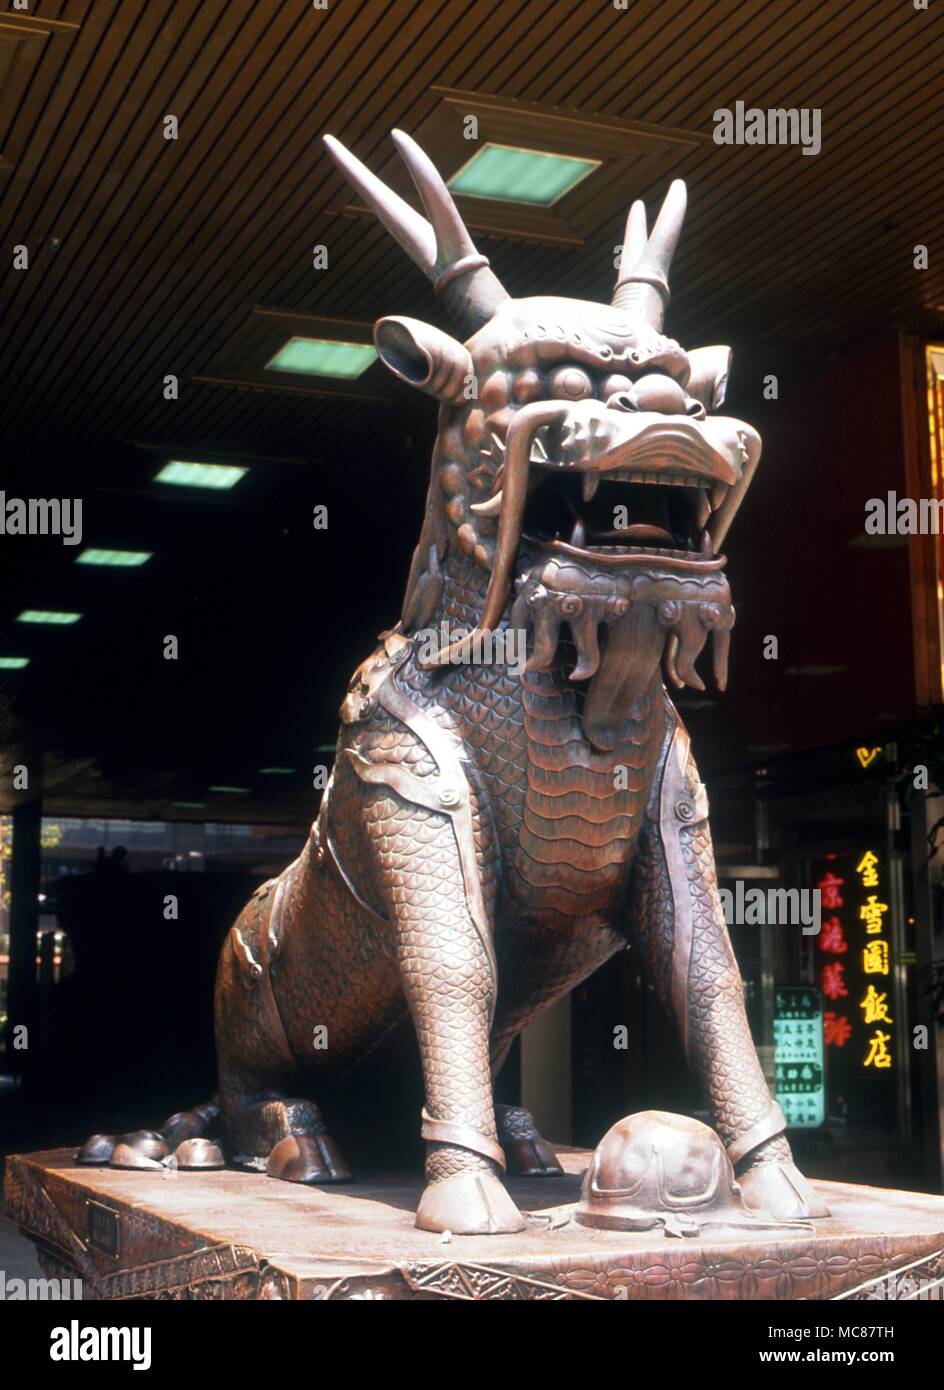 Chinese Mythology The Chinese animal composite with feet of horse body of lion head of dragon. Guardian to the front of the Chinese Cultural Centre Hong Kong Stock Photo